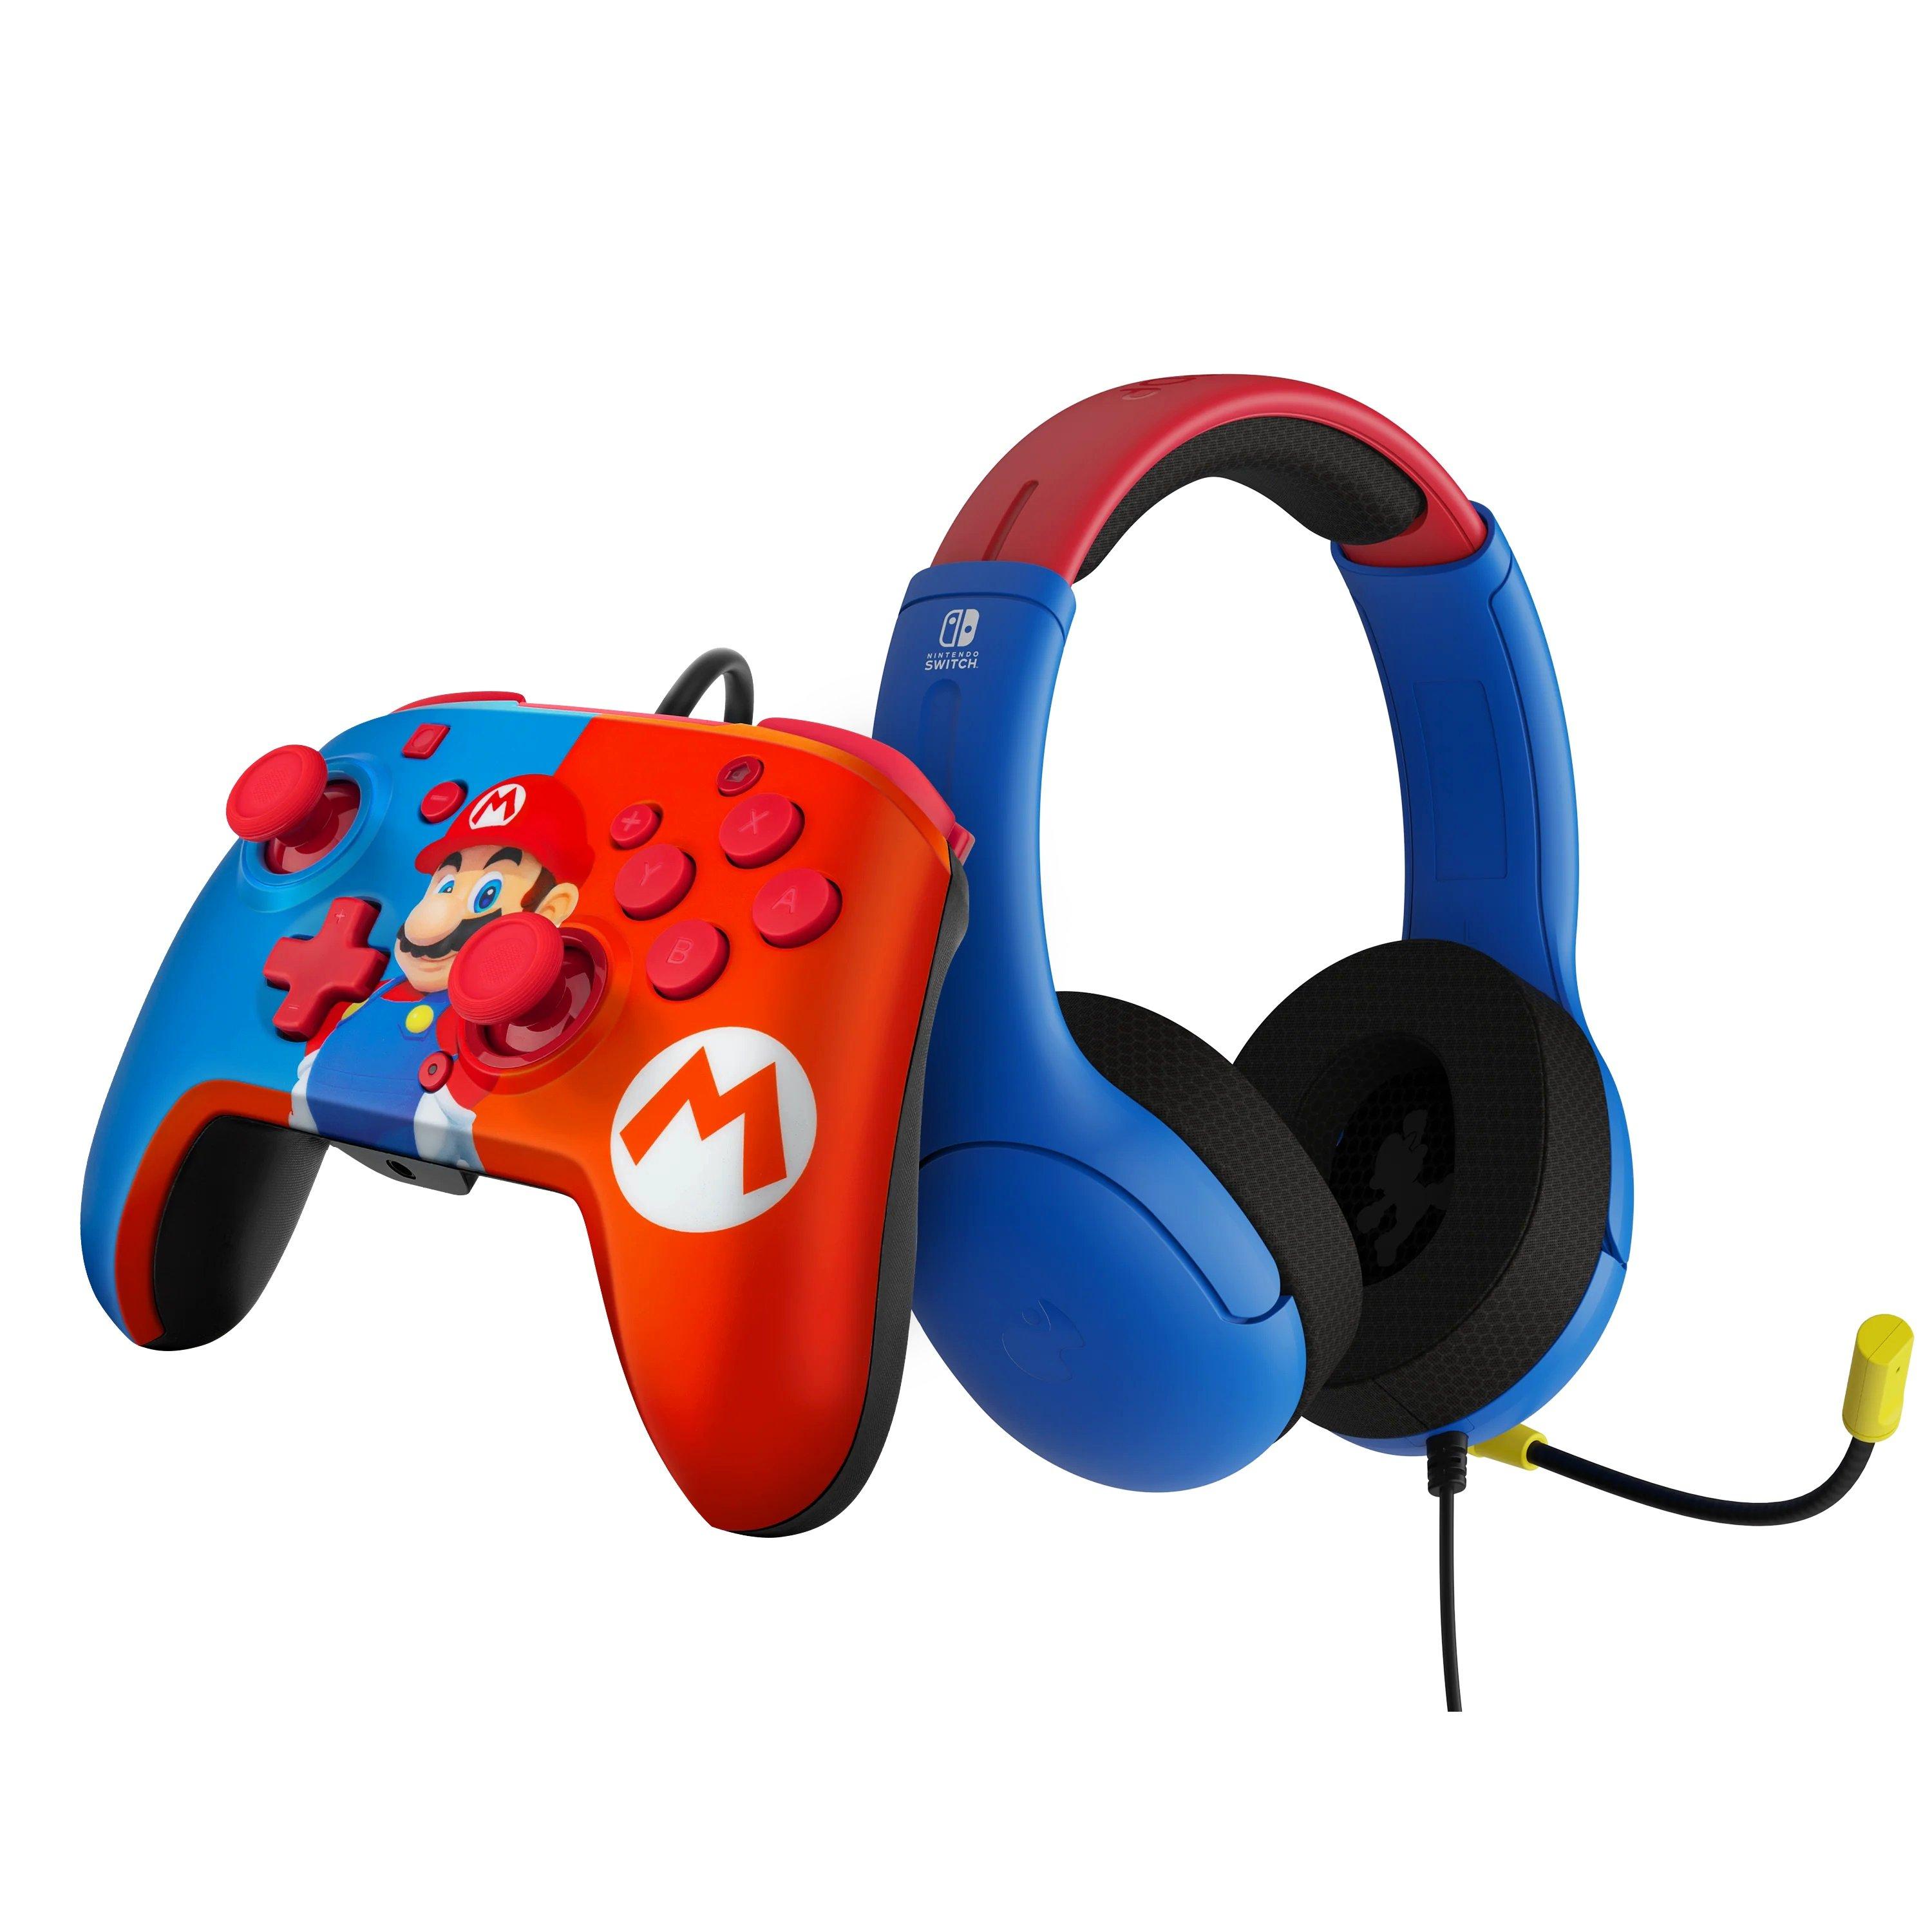 PDP AIRLITE Wired Headset and REMATCH Wired Controller Bundle for Nintendo  Switch - Mario Dash